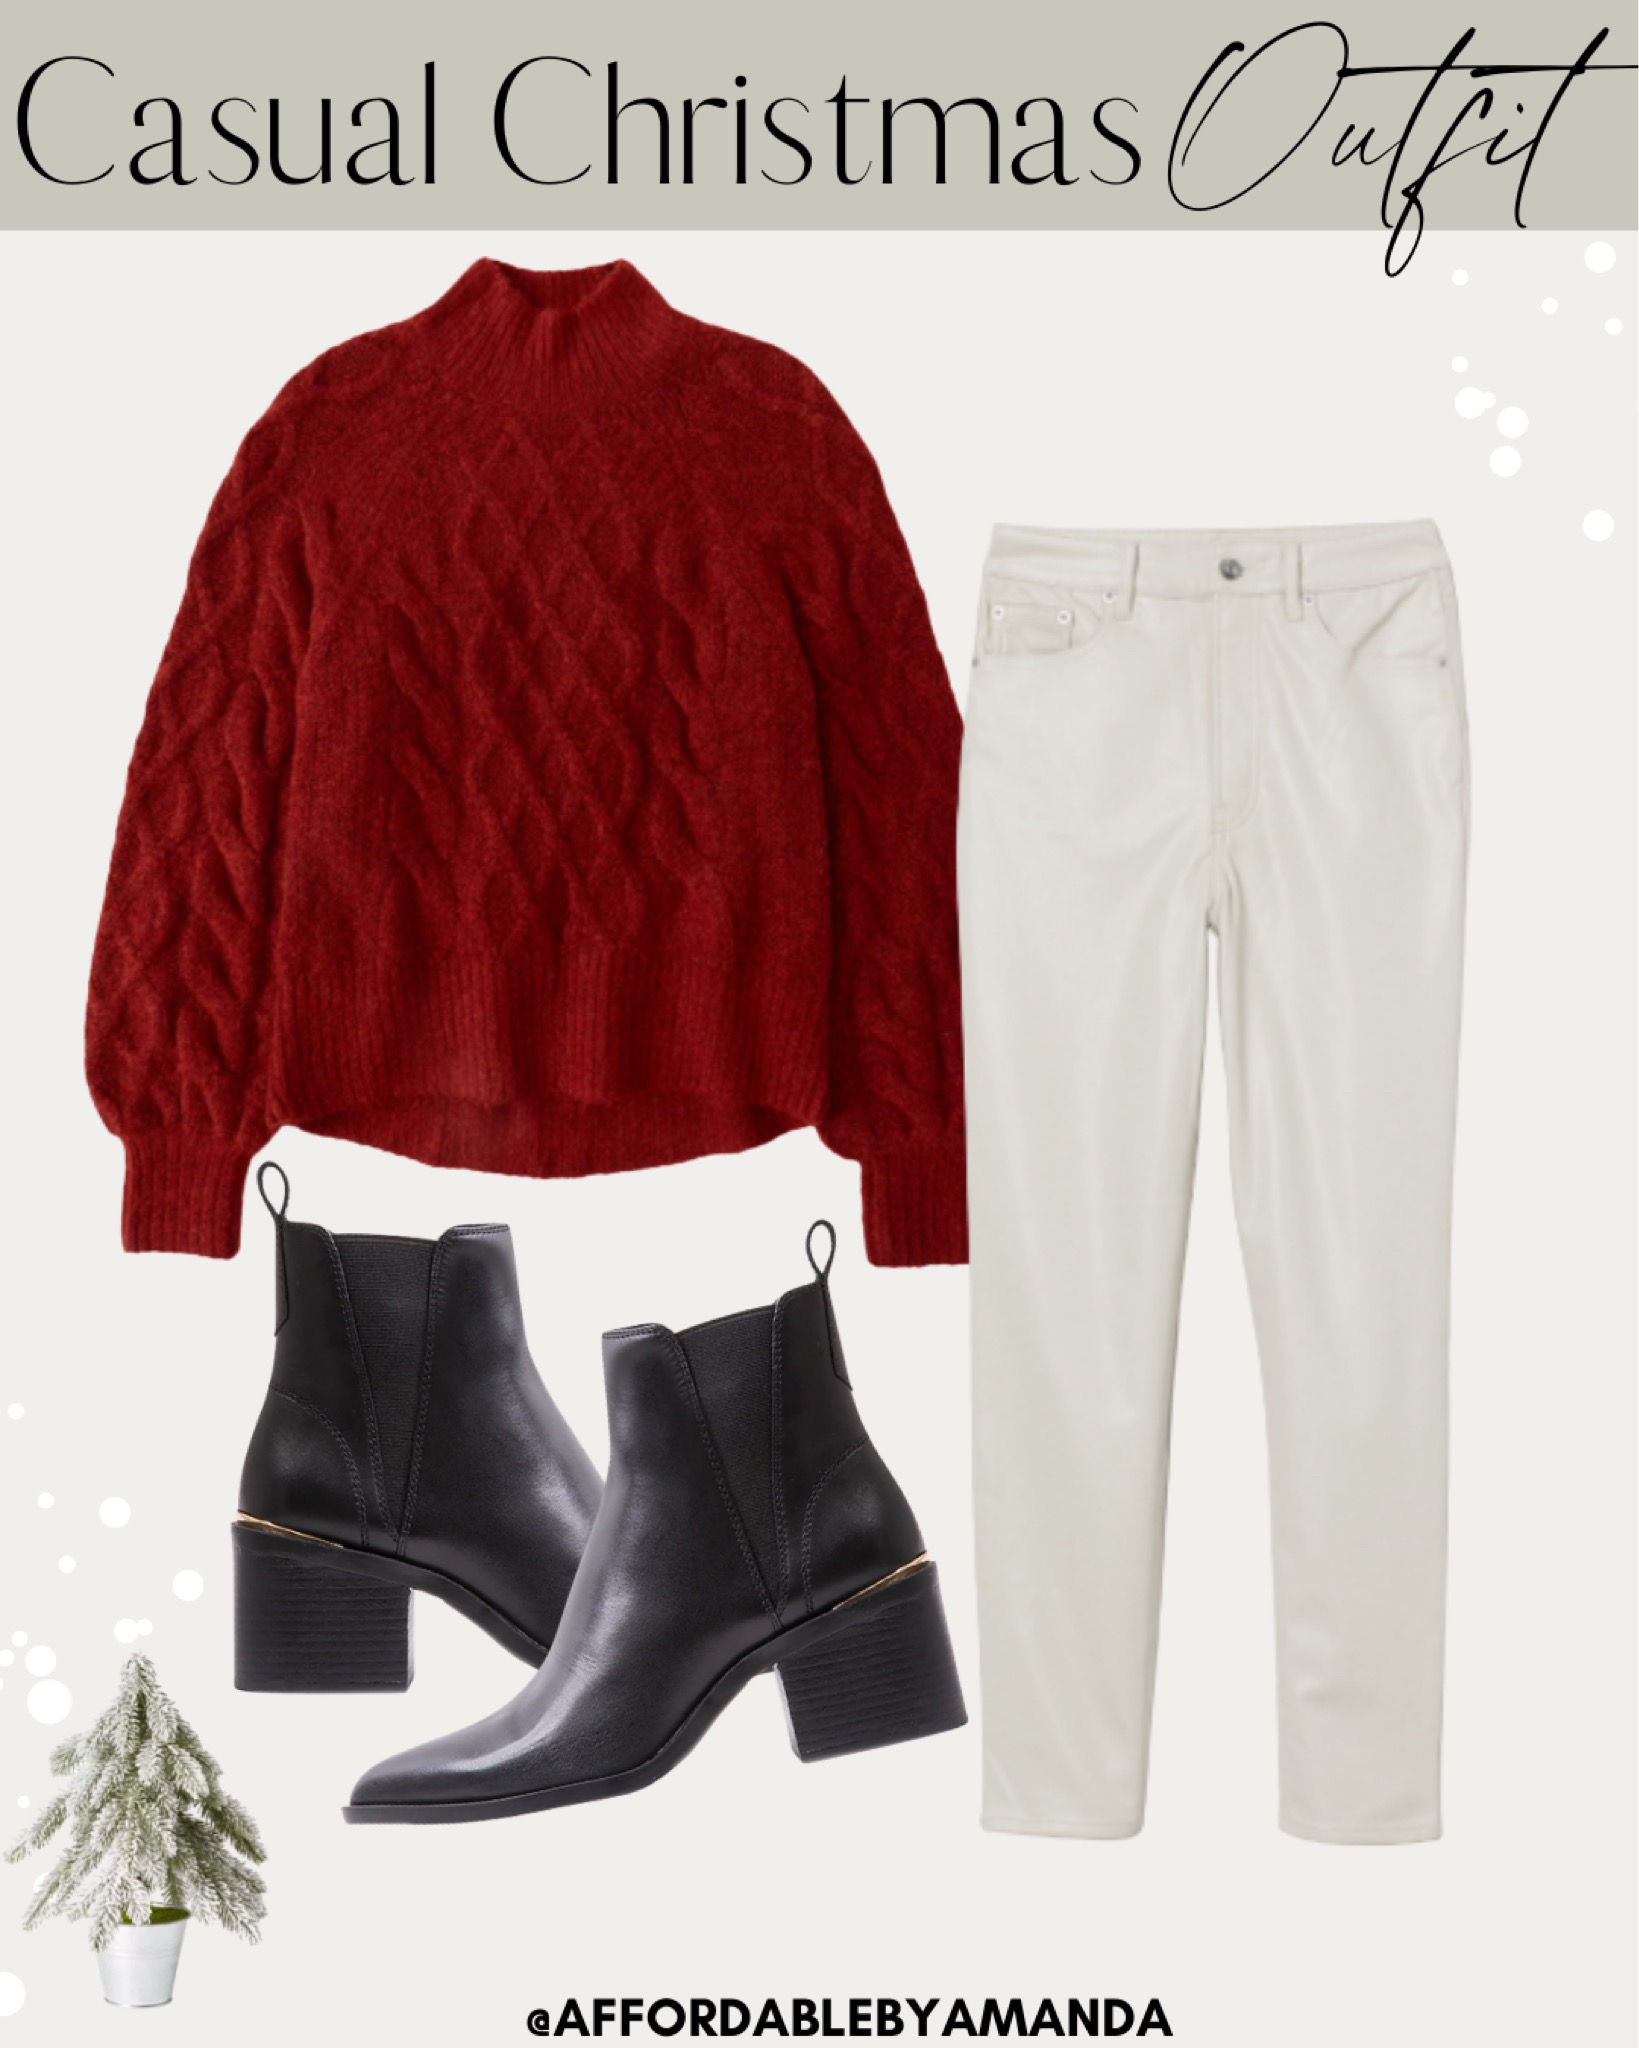 Casual, Preppy Christmas Outfit